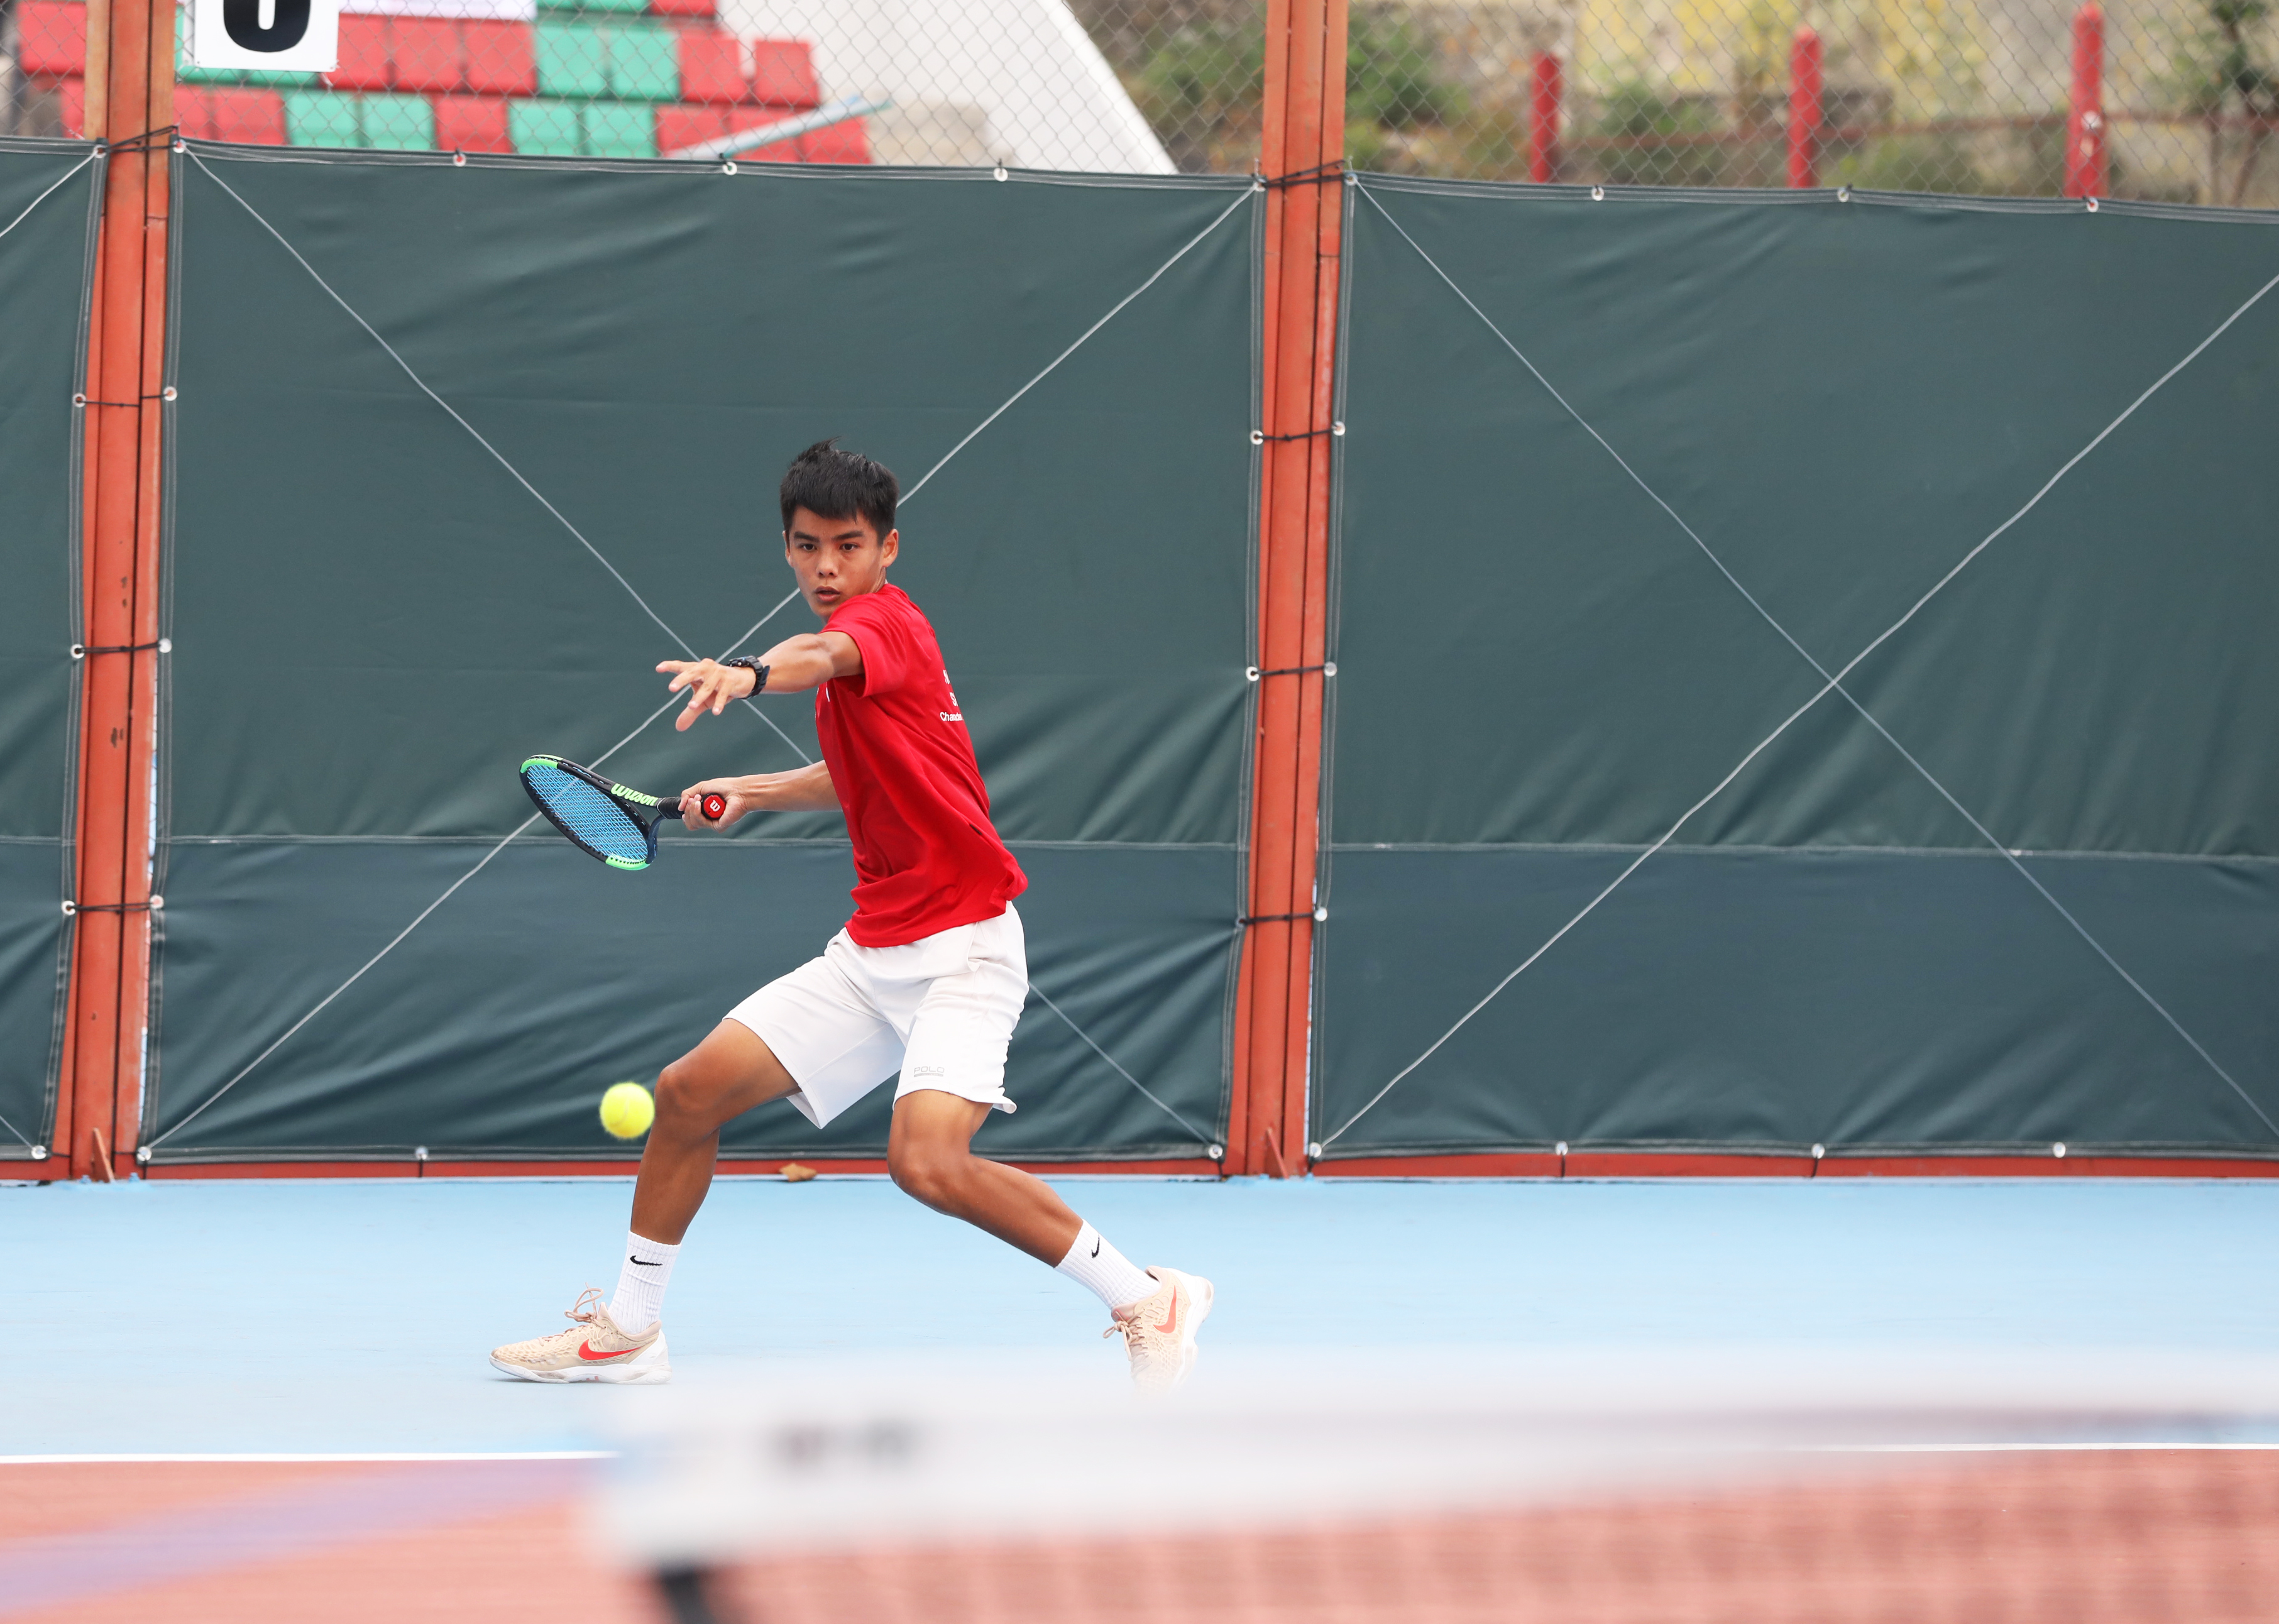 Sixteen-year-old RI student Timothy Lim putting up a riveting performance in the Tennis men’s singles preliminaries. 